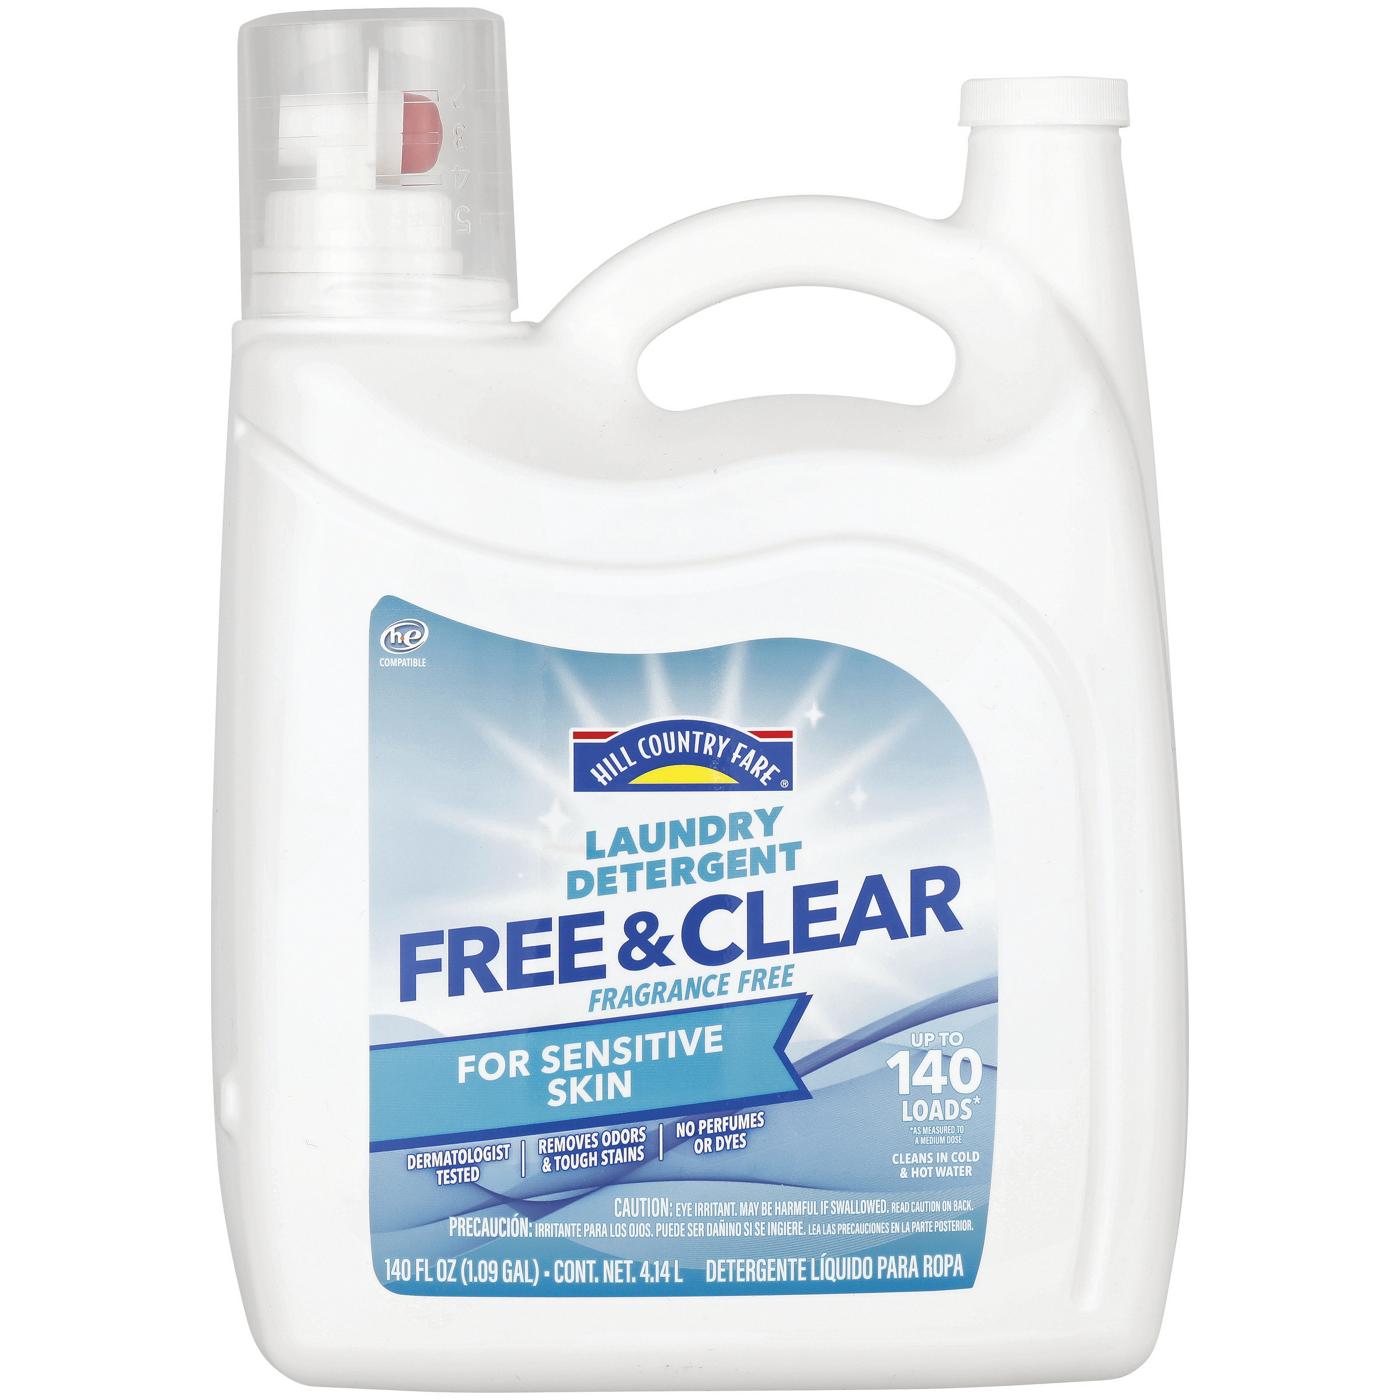 Hill Country Fare Free & Clear HE Liquid Laundry Detergent, 140 Loads - Fragrance-Free; image 1 of 3